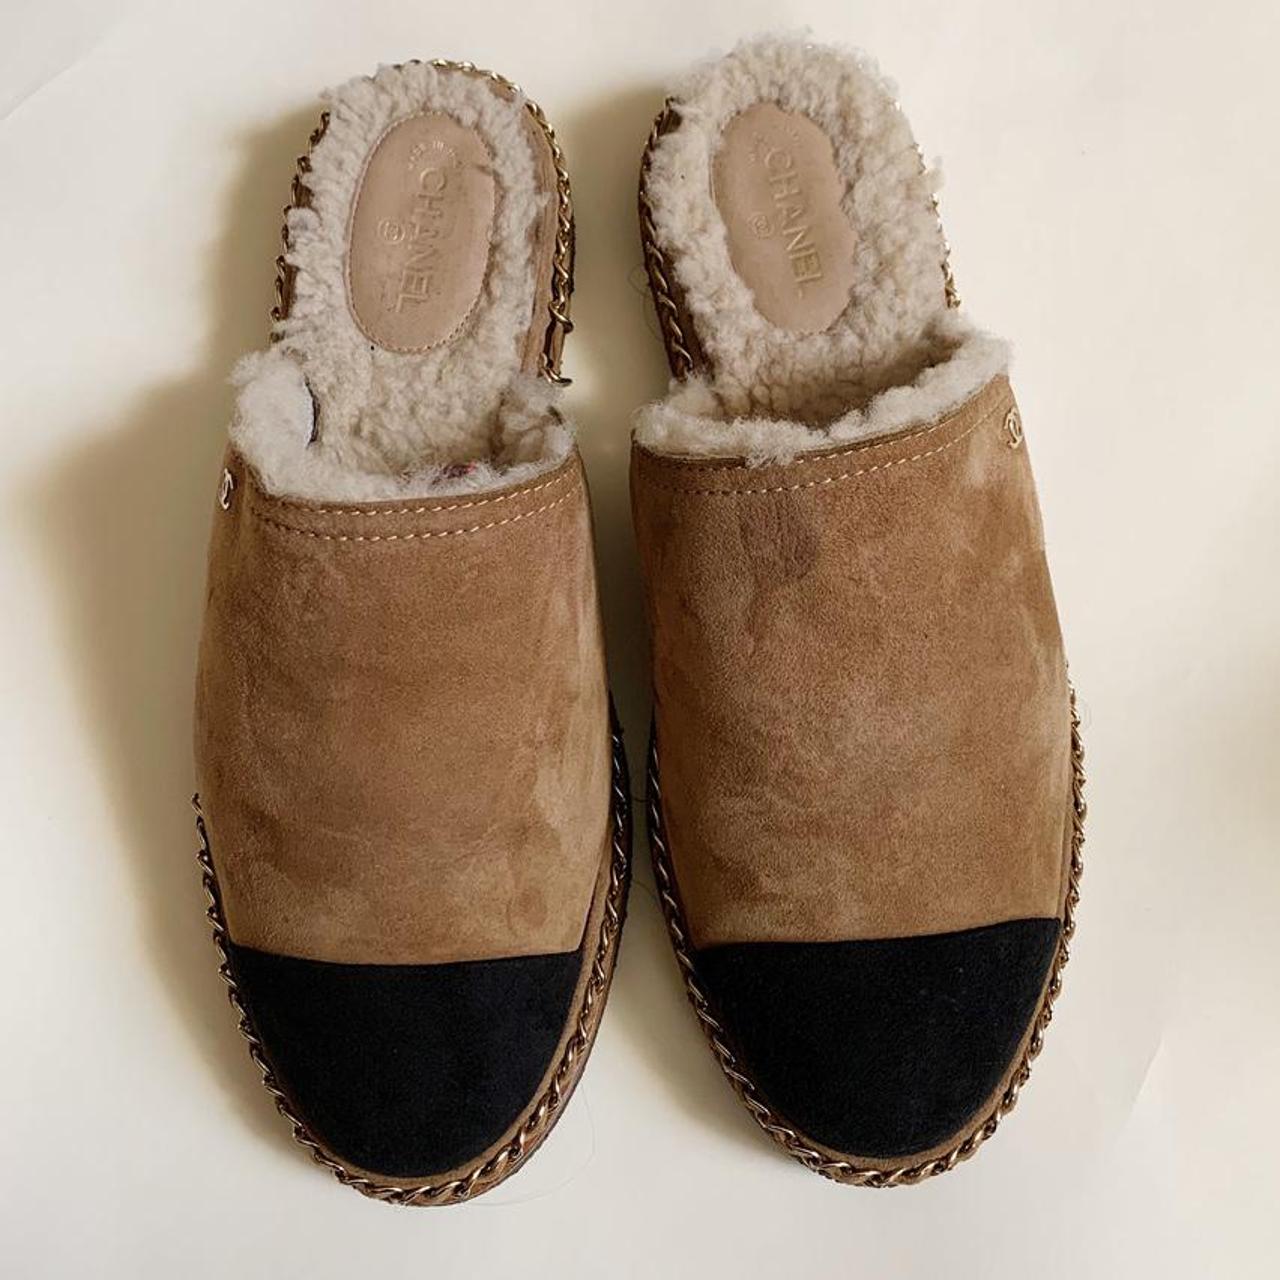 Chanel Kid Suede Shearling Mules Slides - Women’s